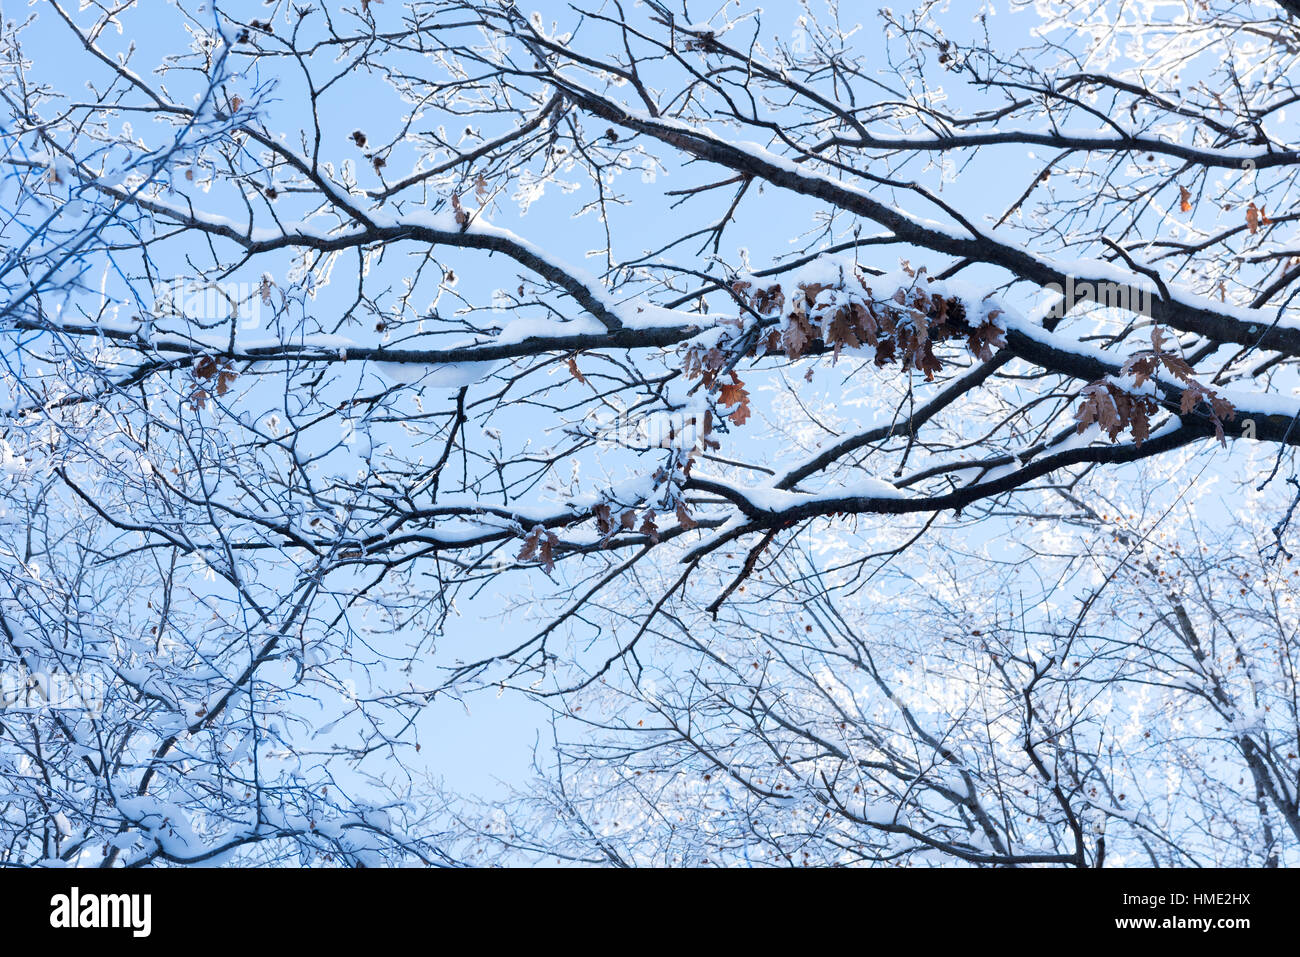 Snow covered tree branches against blue sky Stock Photo